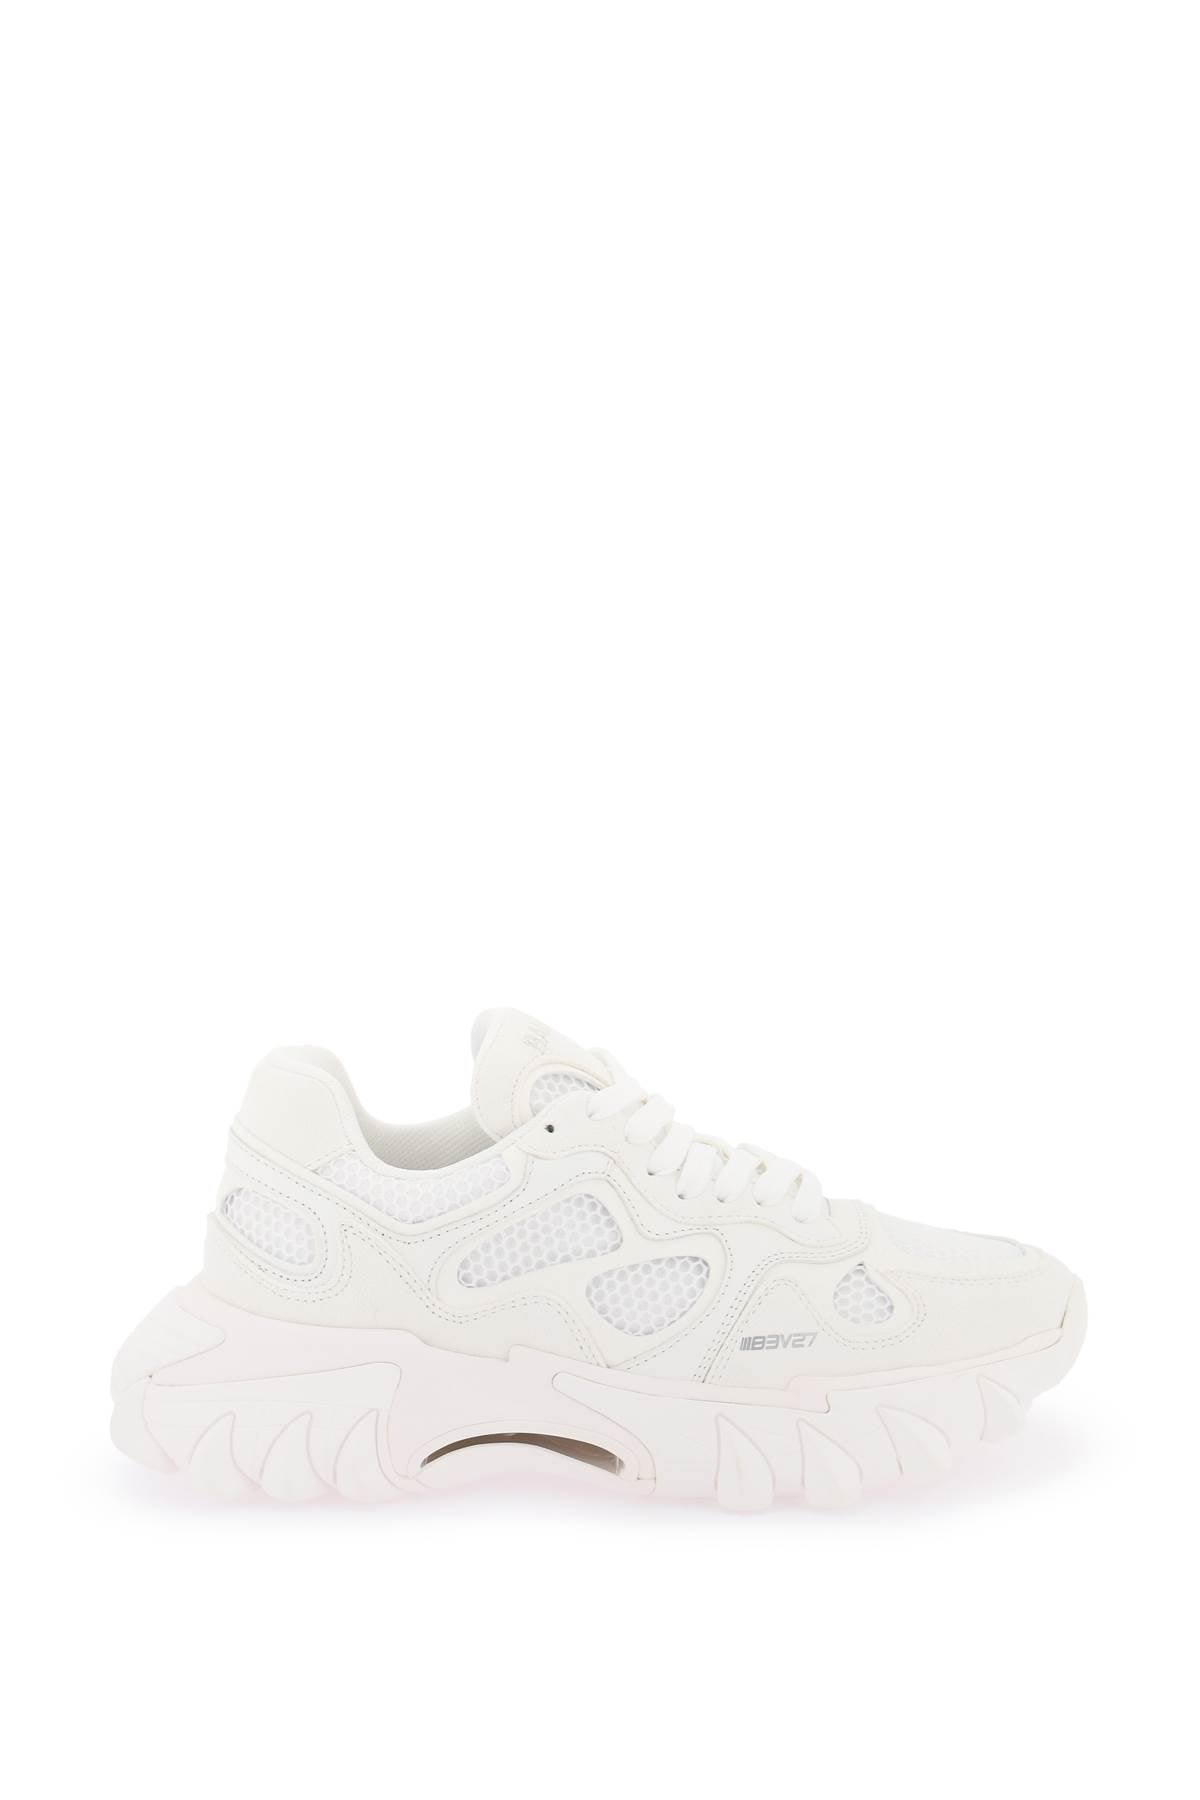 BALMAIN White Leather and Mesh Sneakers for Women by a Top Fashion Brand